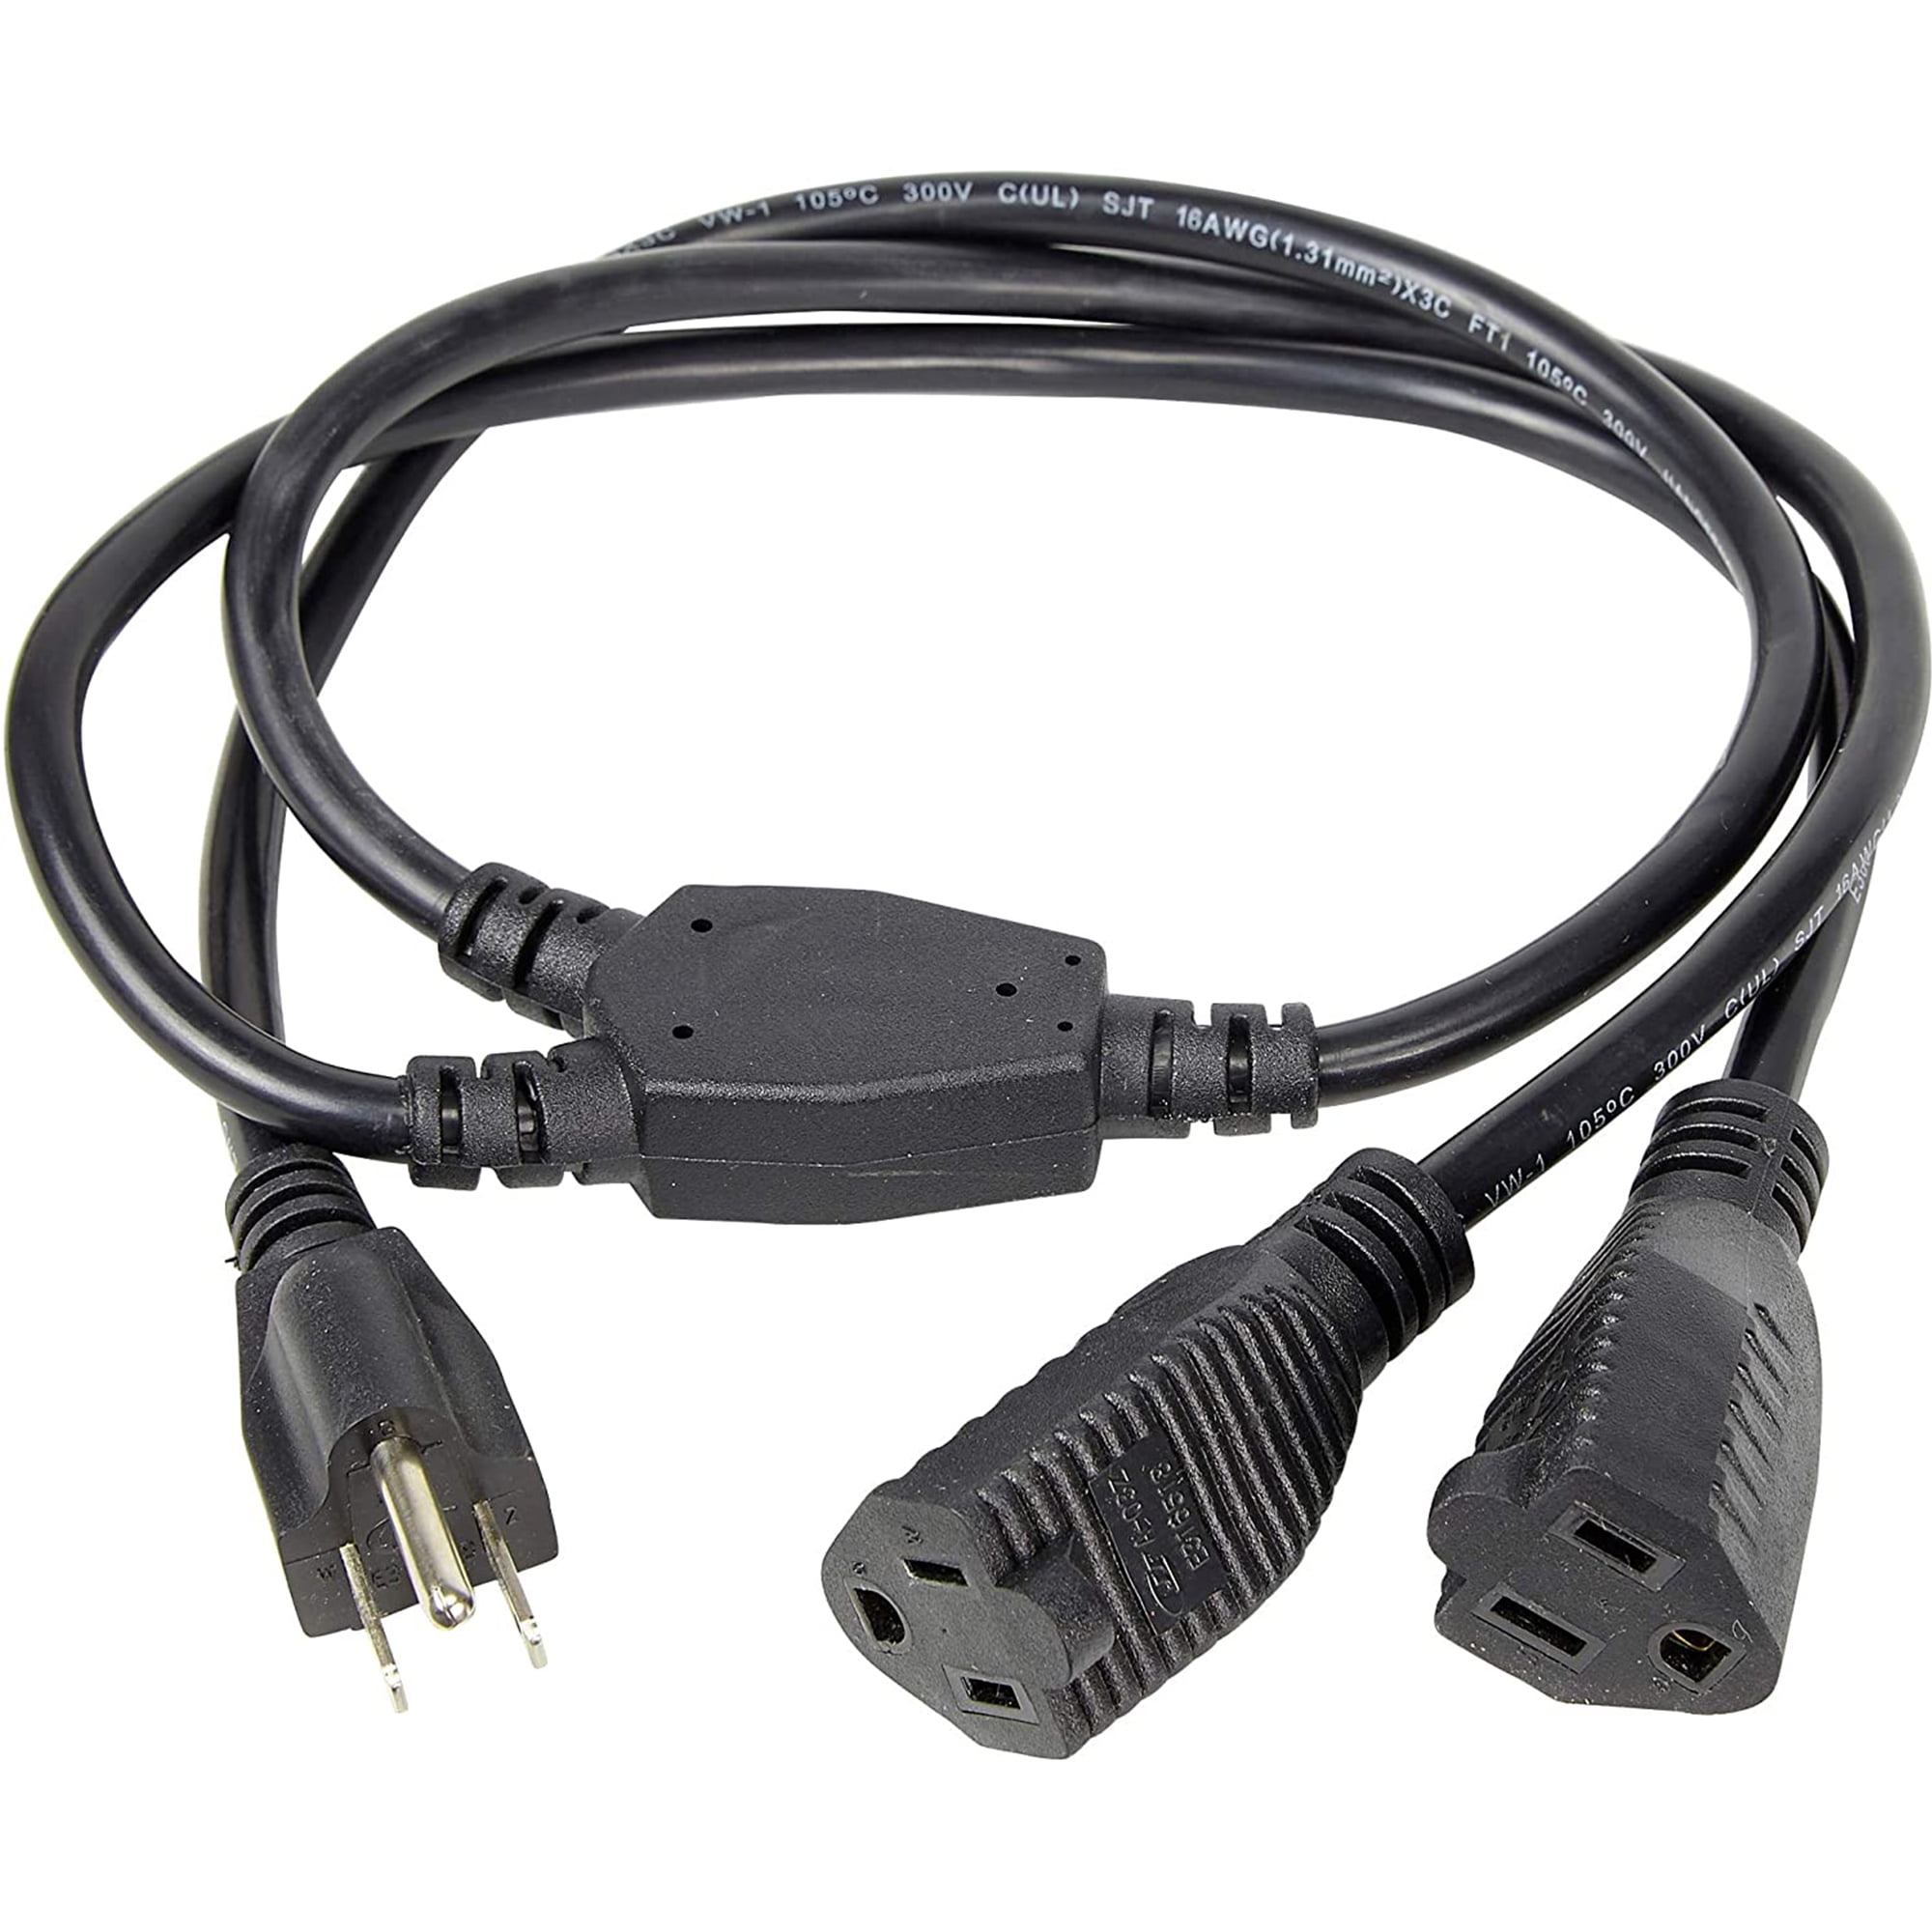 Details about   E186244 Twist-To-Lock 3 Way Split Extension Cord 